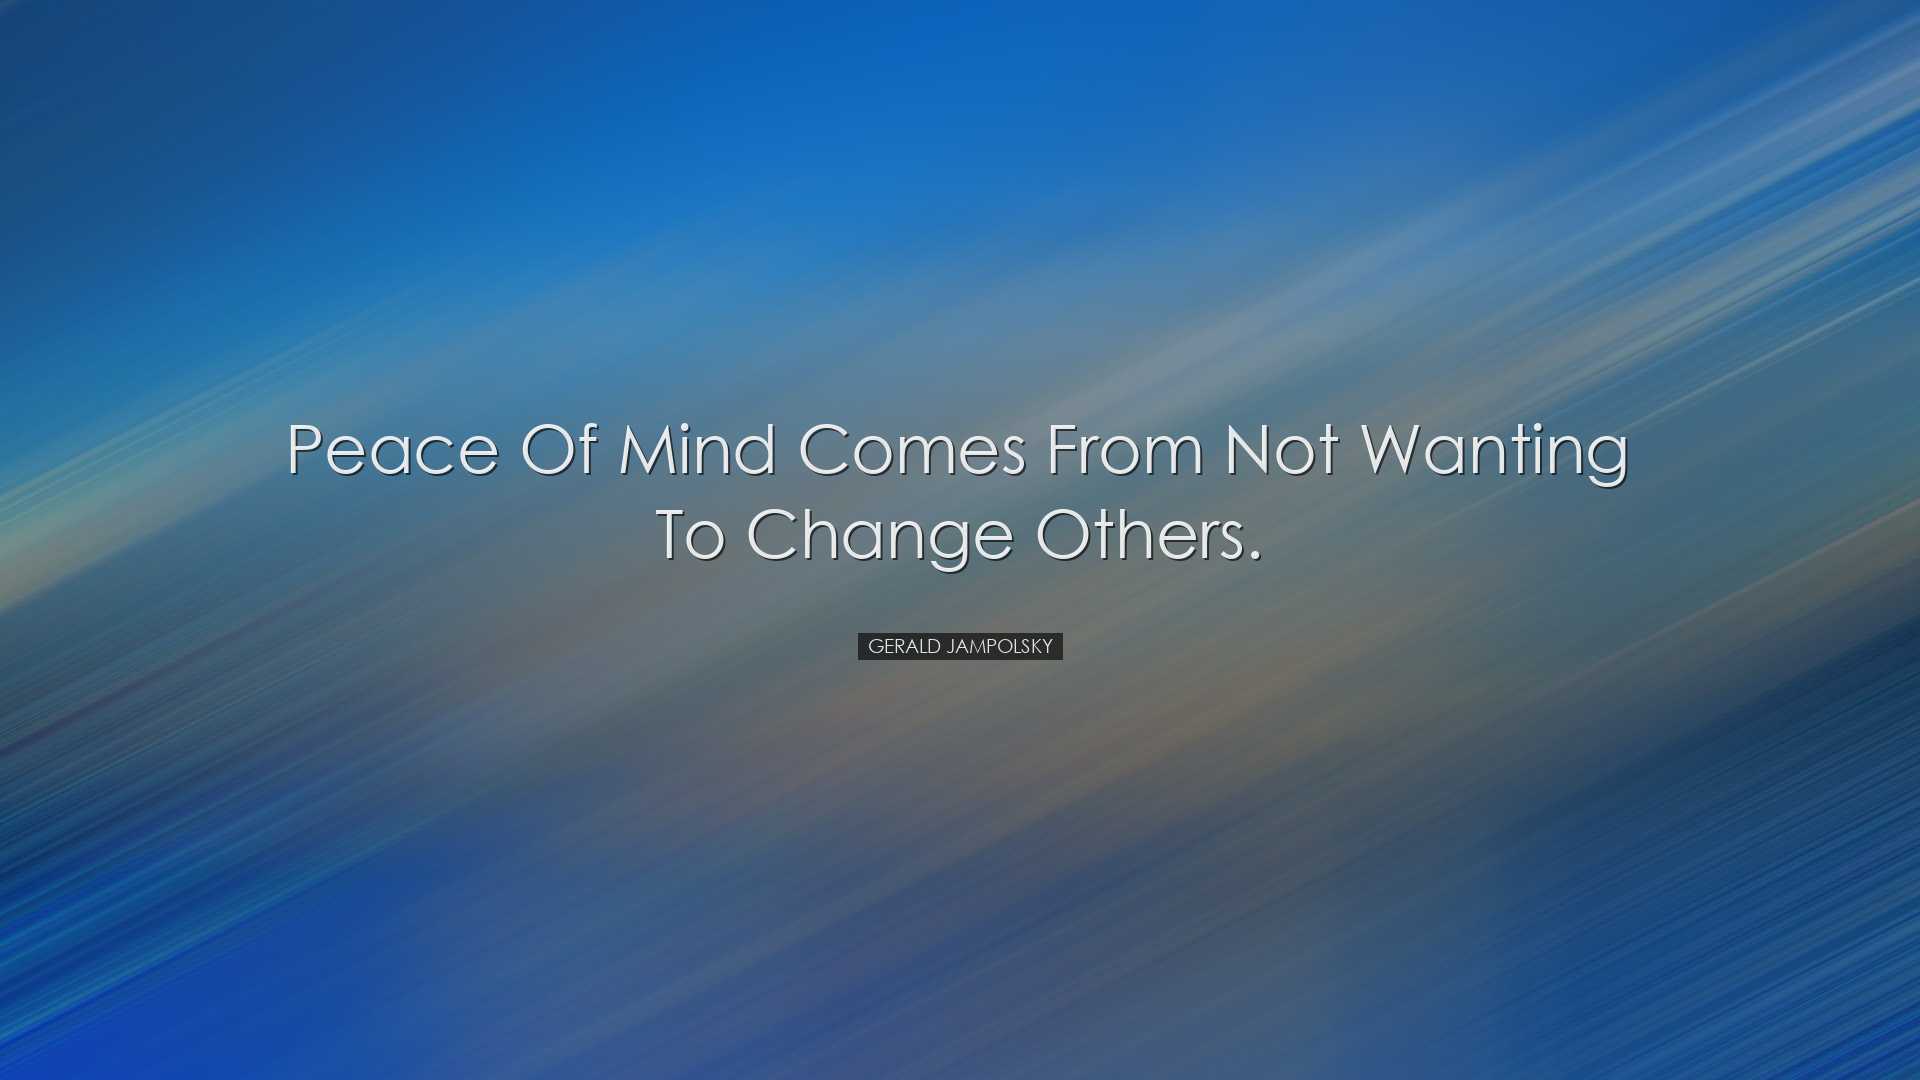 Peace of mind comes from not wanting to change others. - Gerald Ja